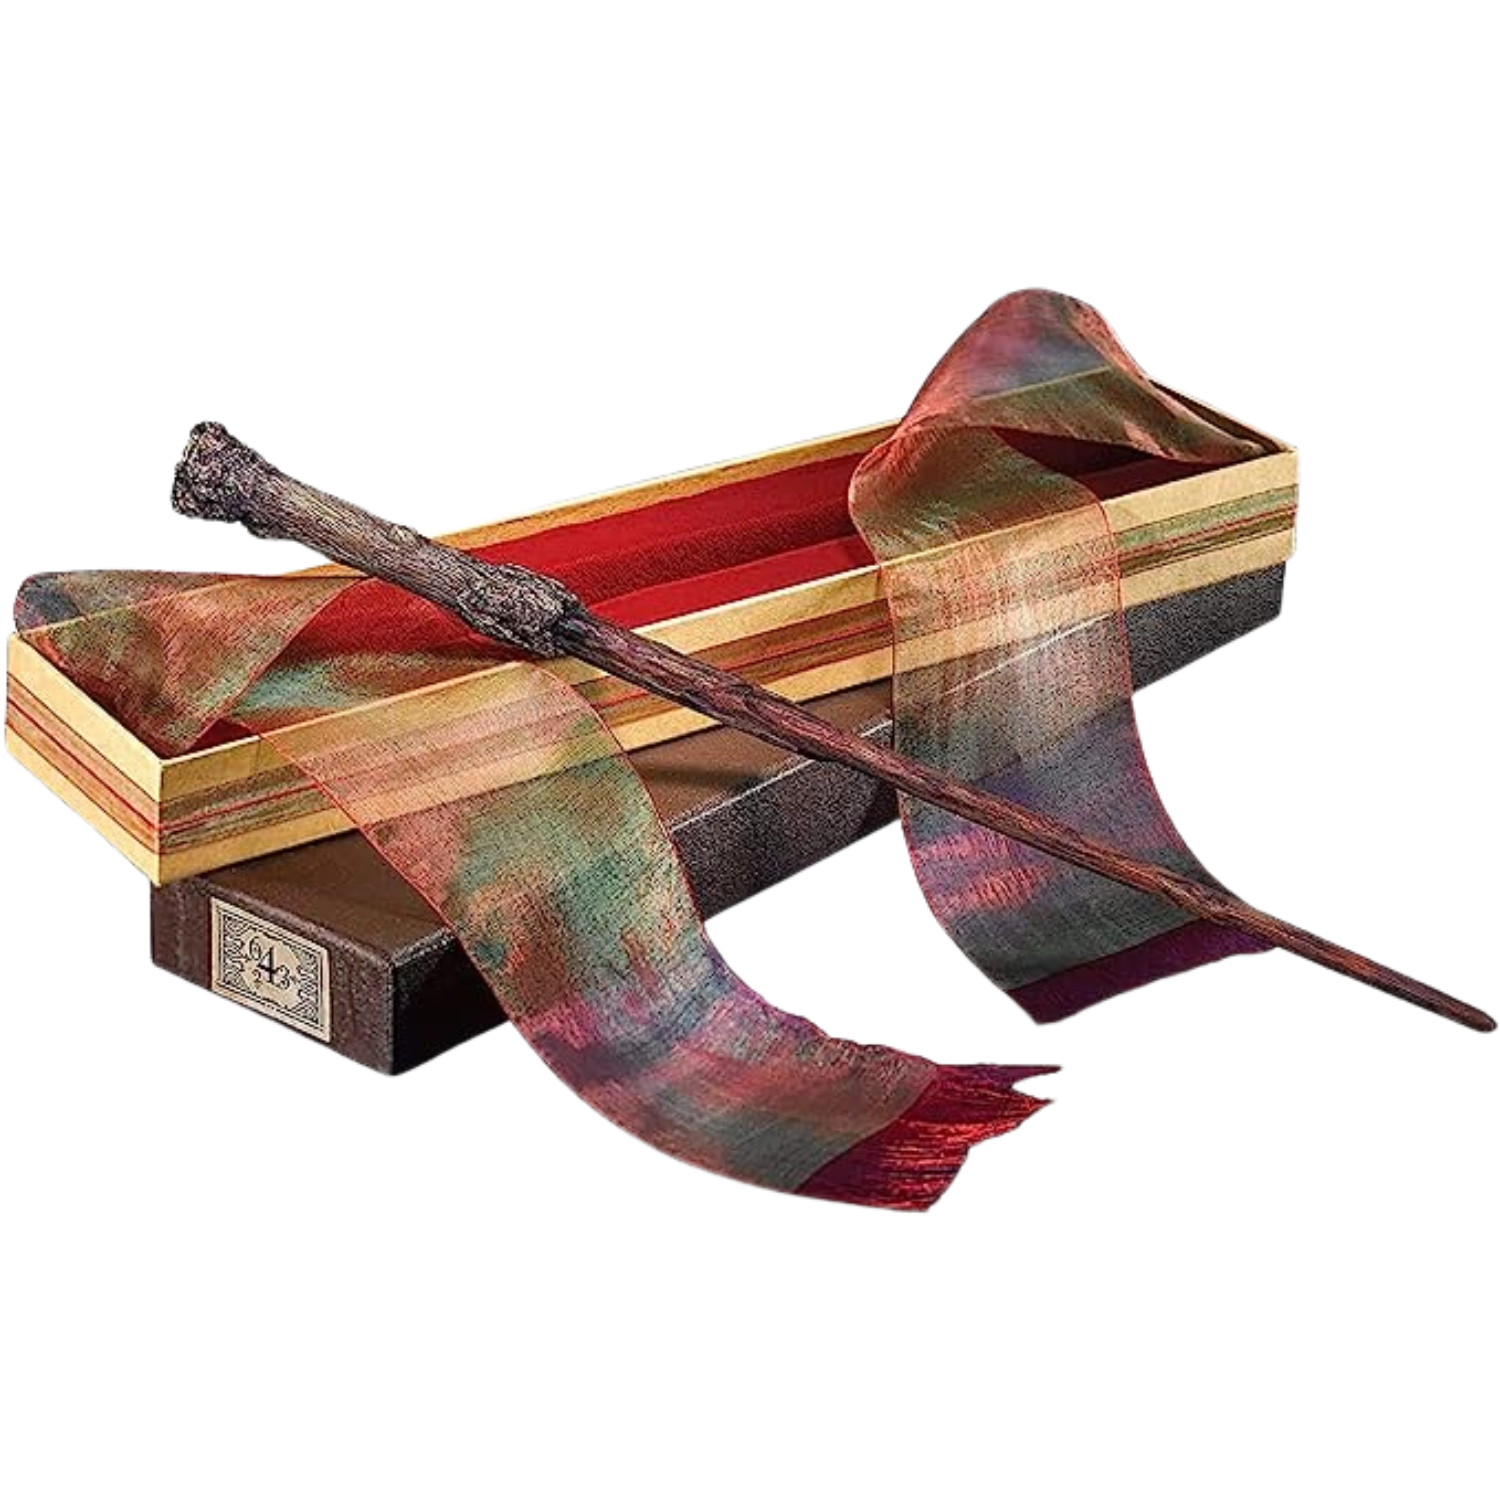 This image shows a replica of Harry Potter's wand from the Harry Potter series and its box.